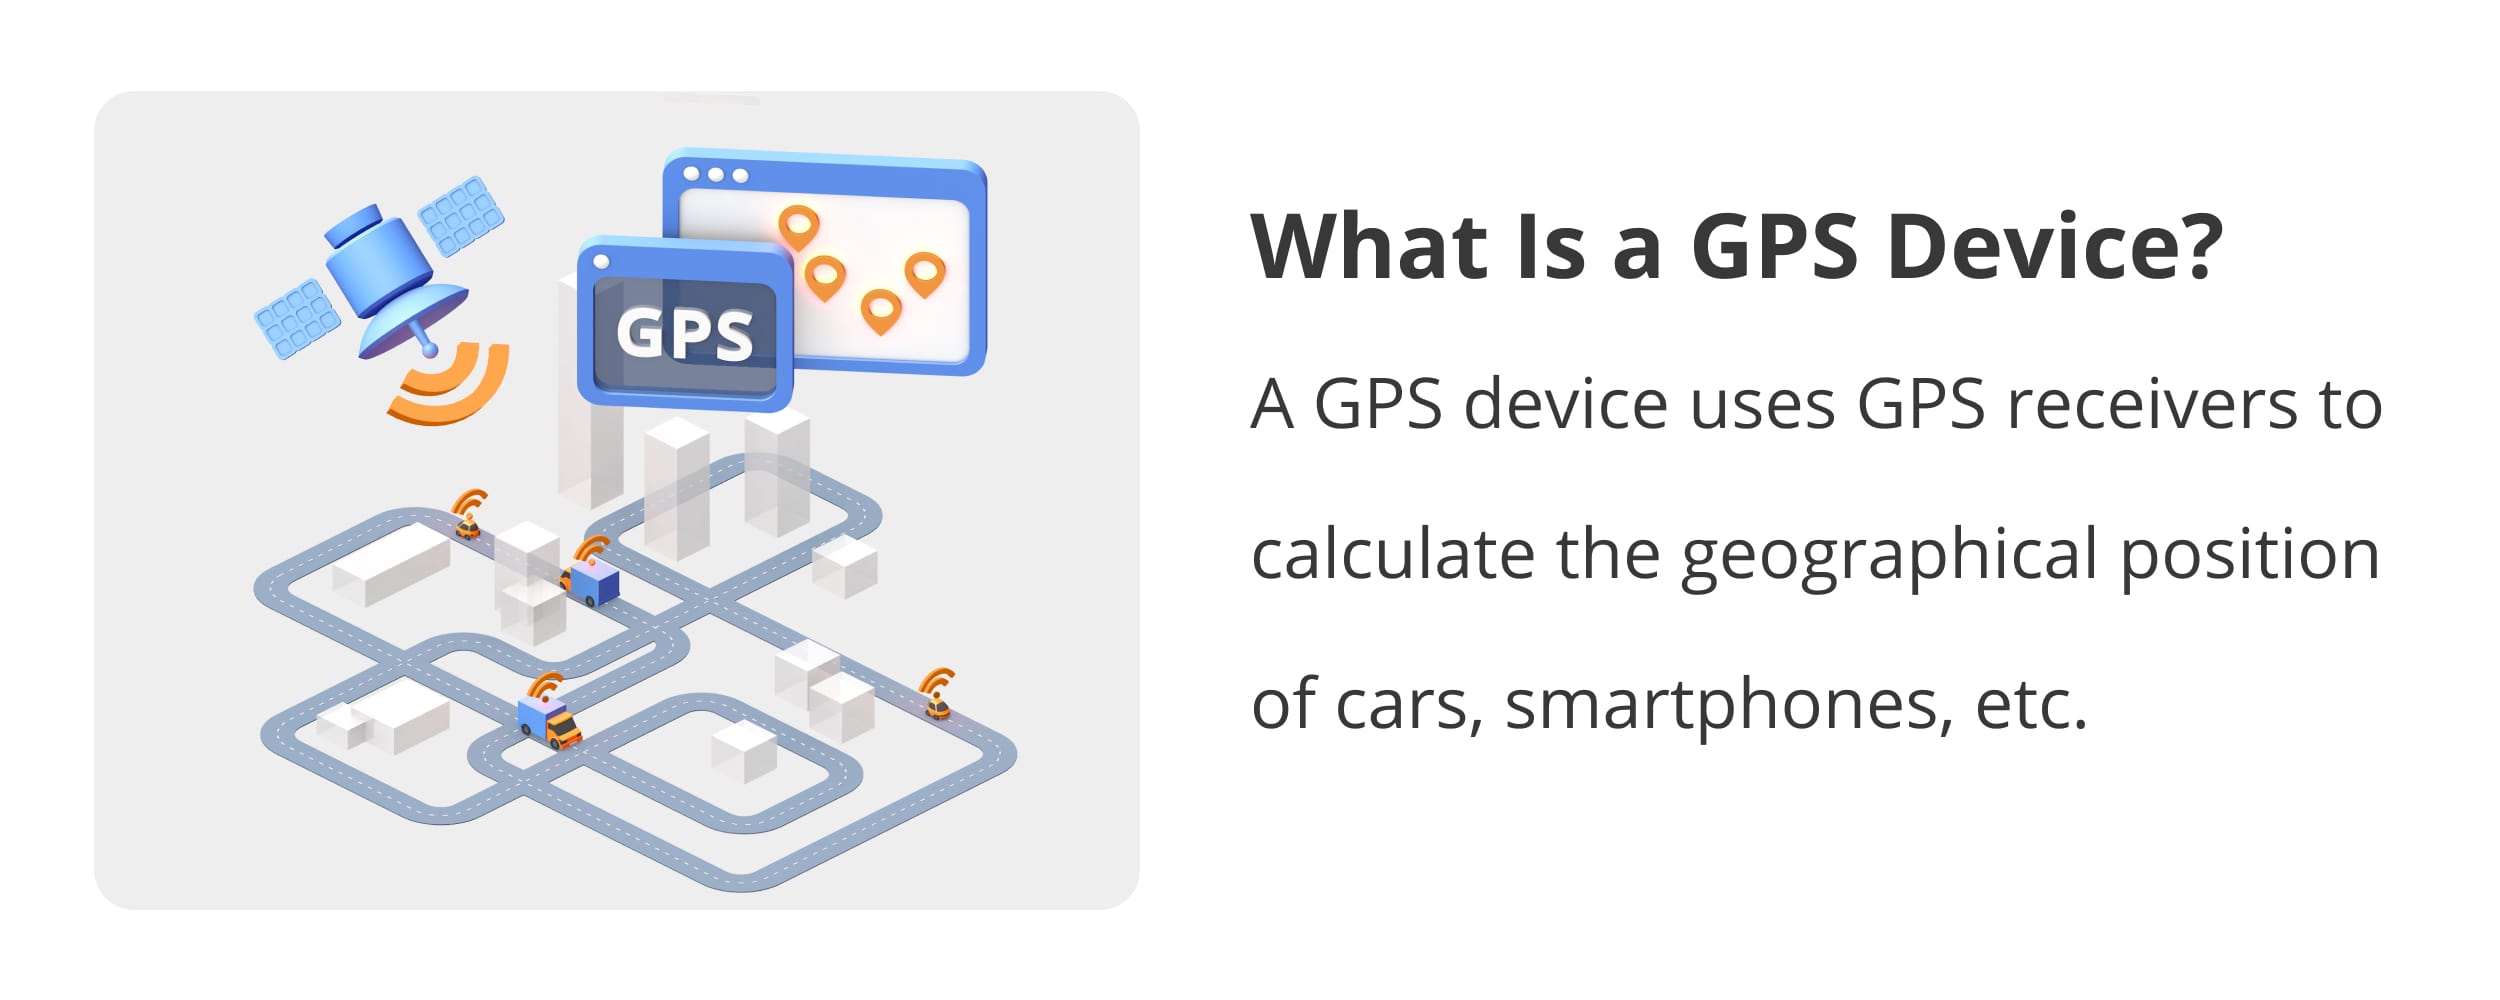 What a GPS device is and how it uses the signals from satellites to calculate the geographical location of trucks.